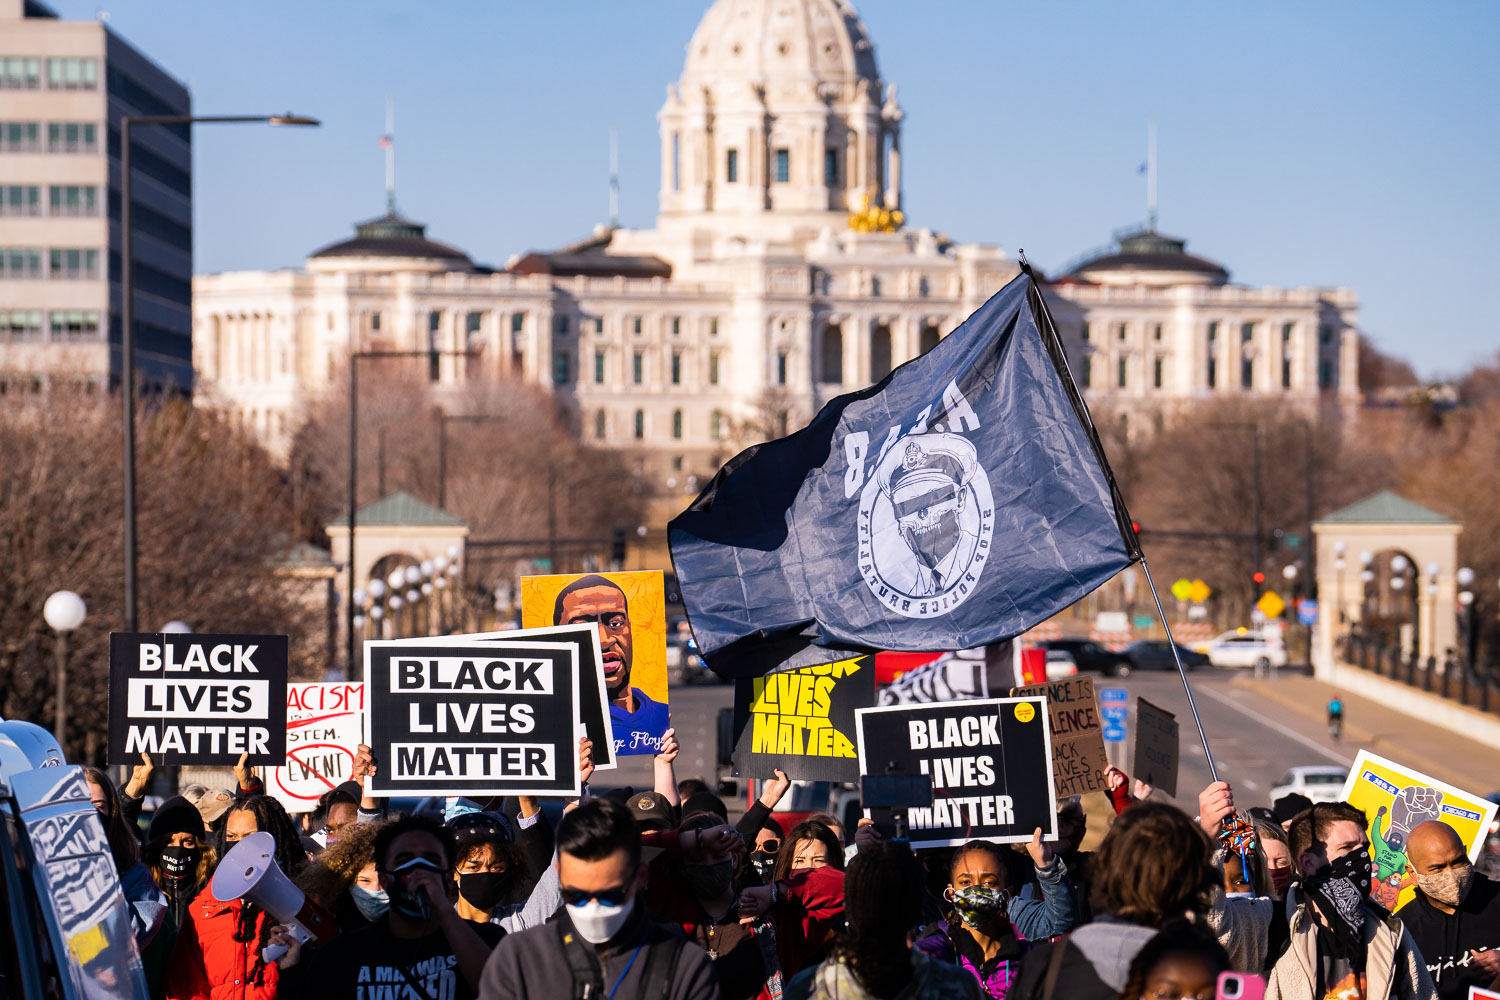 Protesters march near the Minnesota State Capitol demanding justice for George Floyd as well as all lives impacted by police brutality.